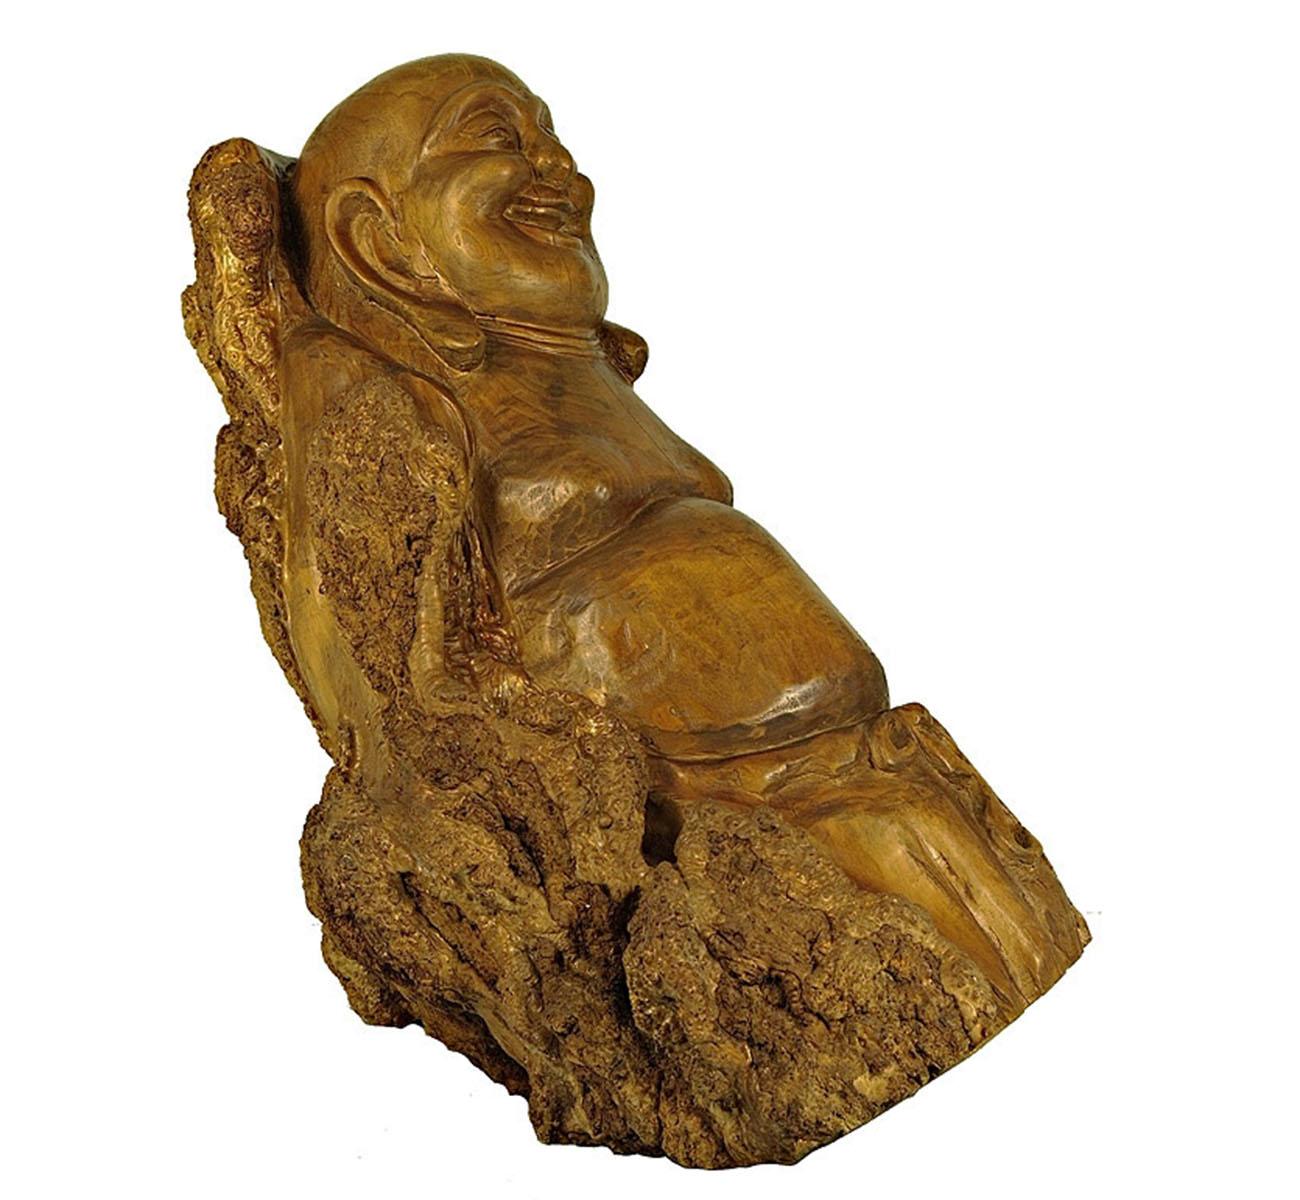 This magnificent Chinese Antique Carved stump Happy Buddha Statuary is 100% hand made and hand carved in about 1850 - 1900 from the tree stump. Following the natural shape of the tree stump, it shows very detailed hand carving works on it. In